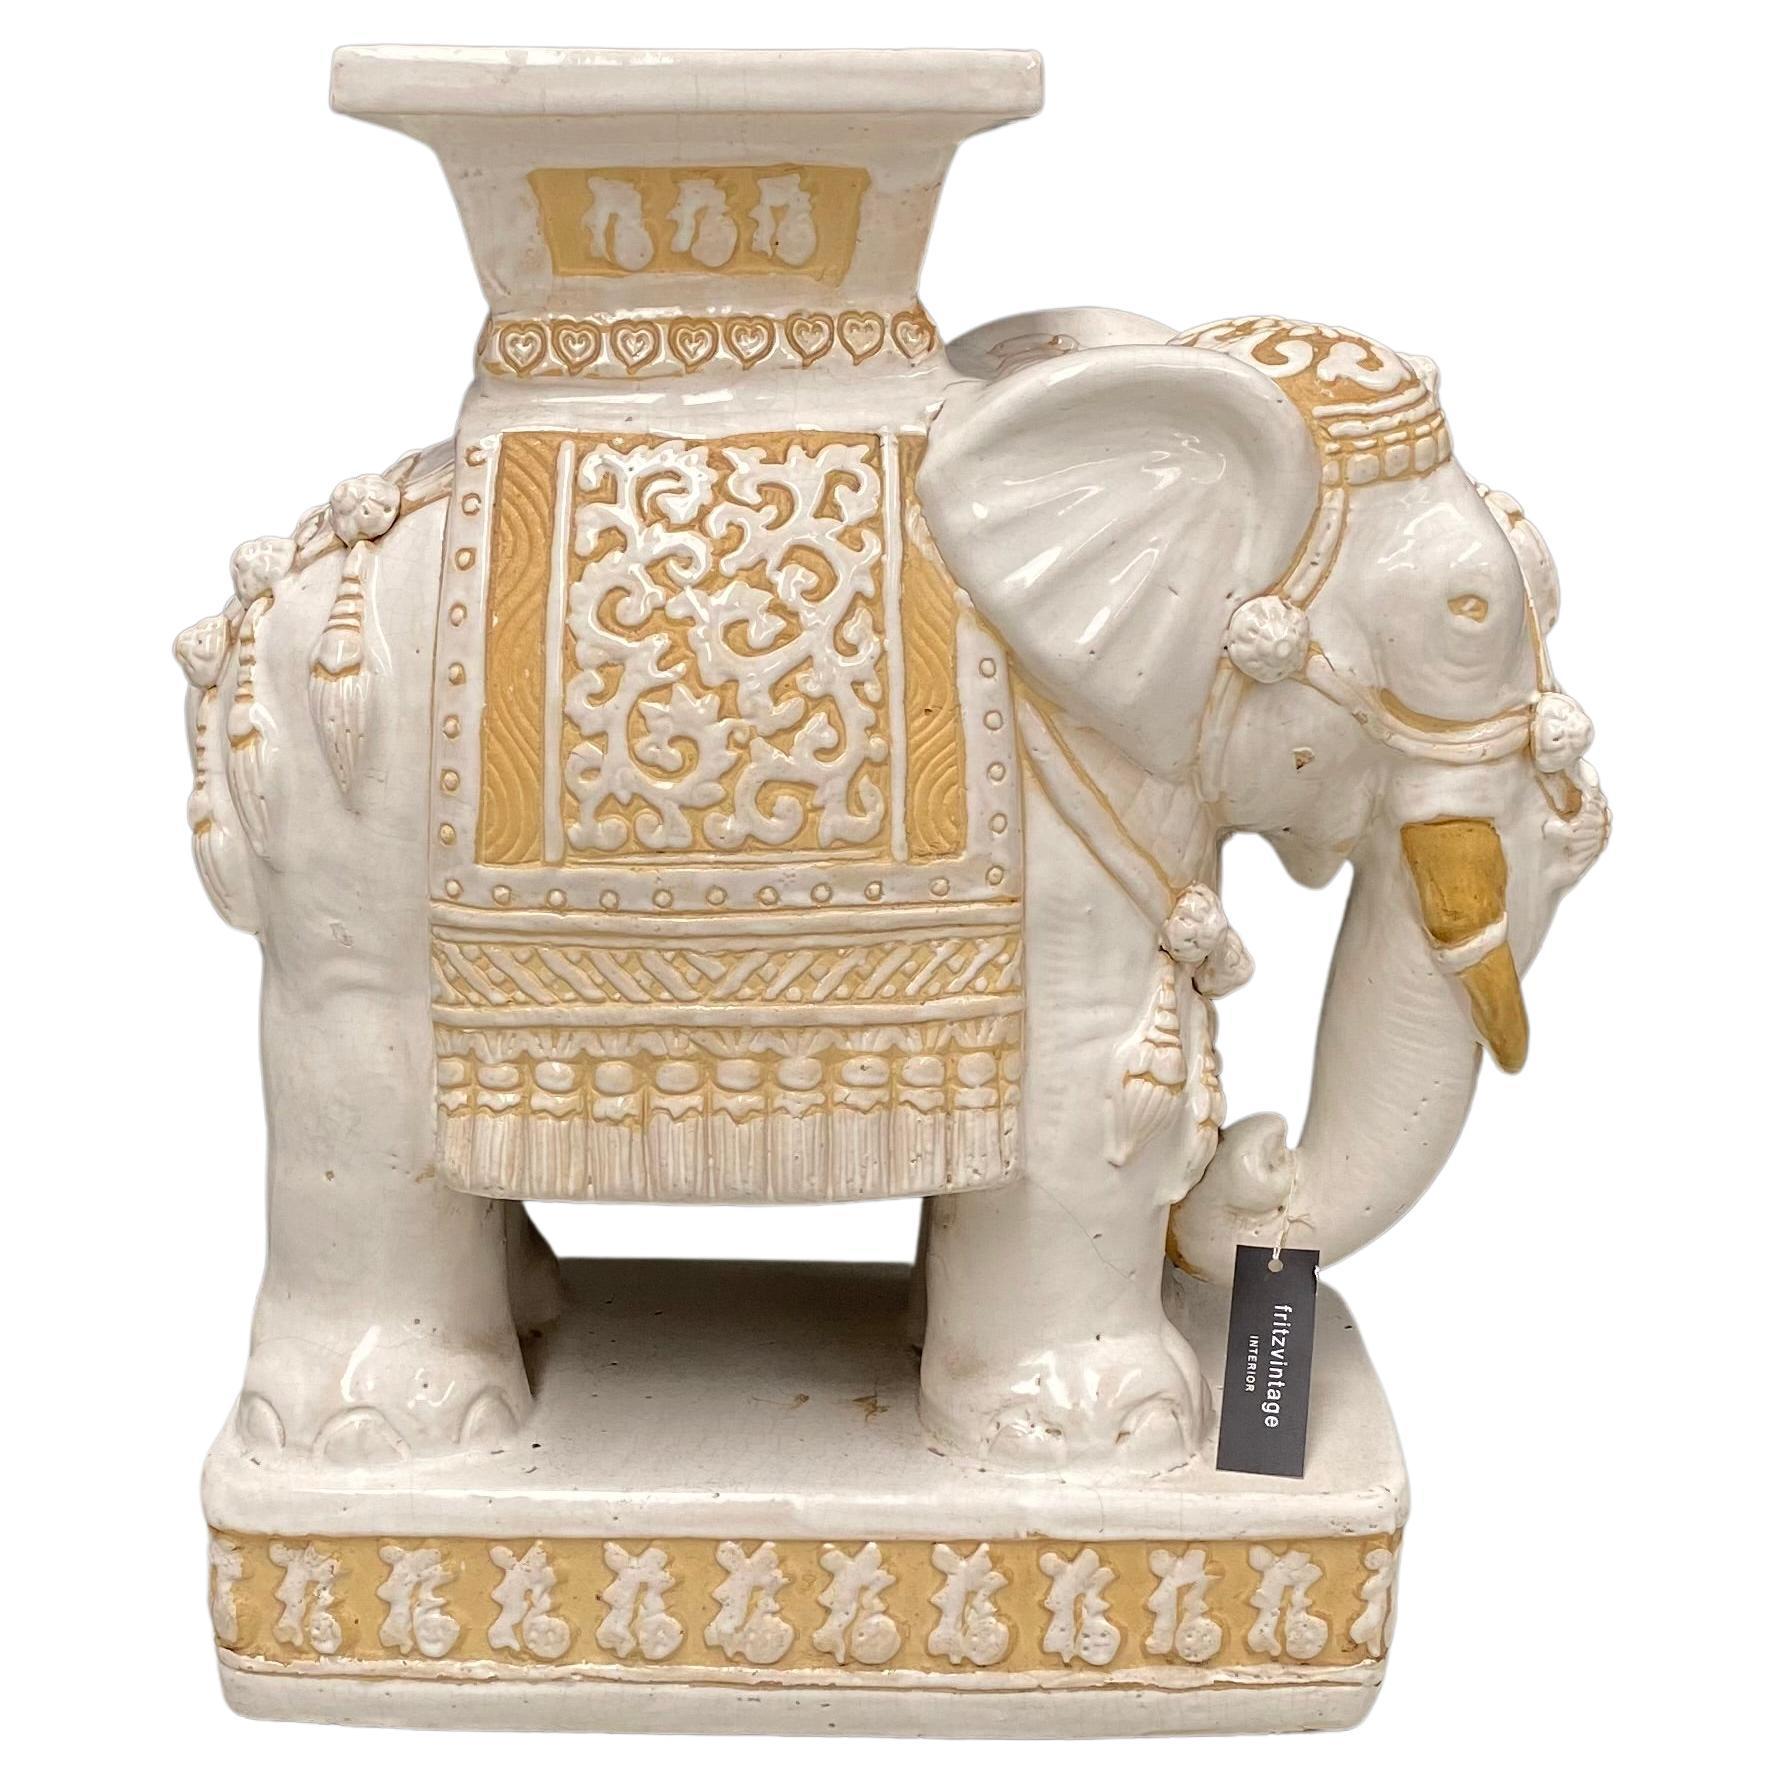 This rare ceramic elephant plantstand in beige and white was designed and made in India in the seventies. In very good condition with no damages.